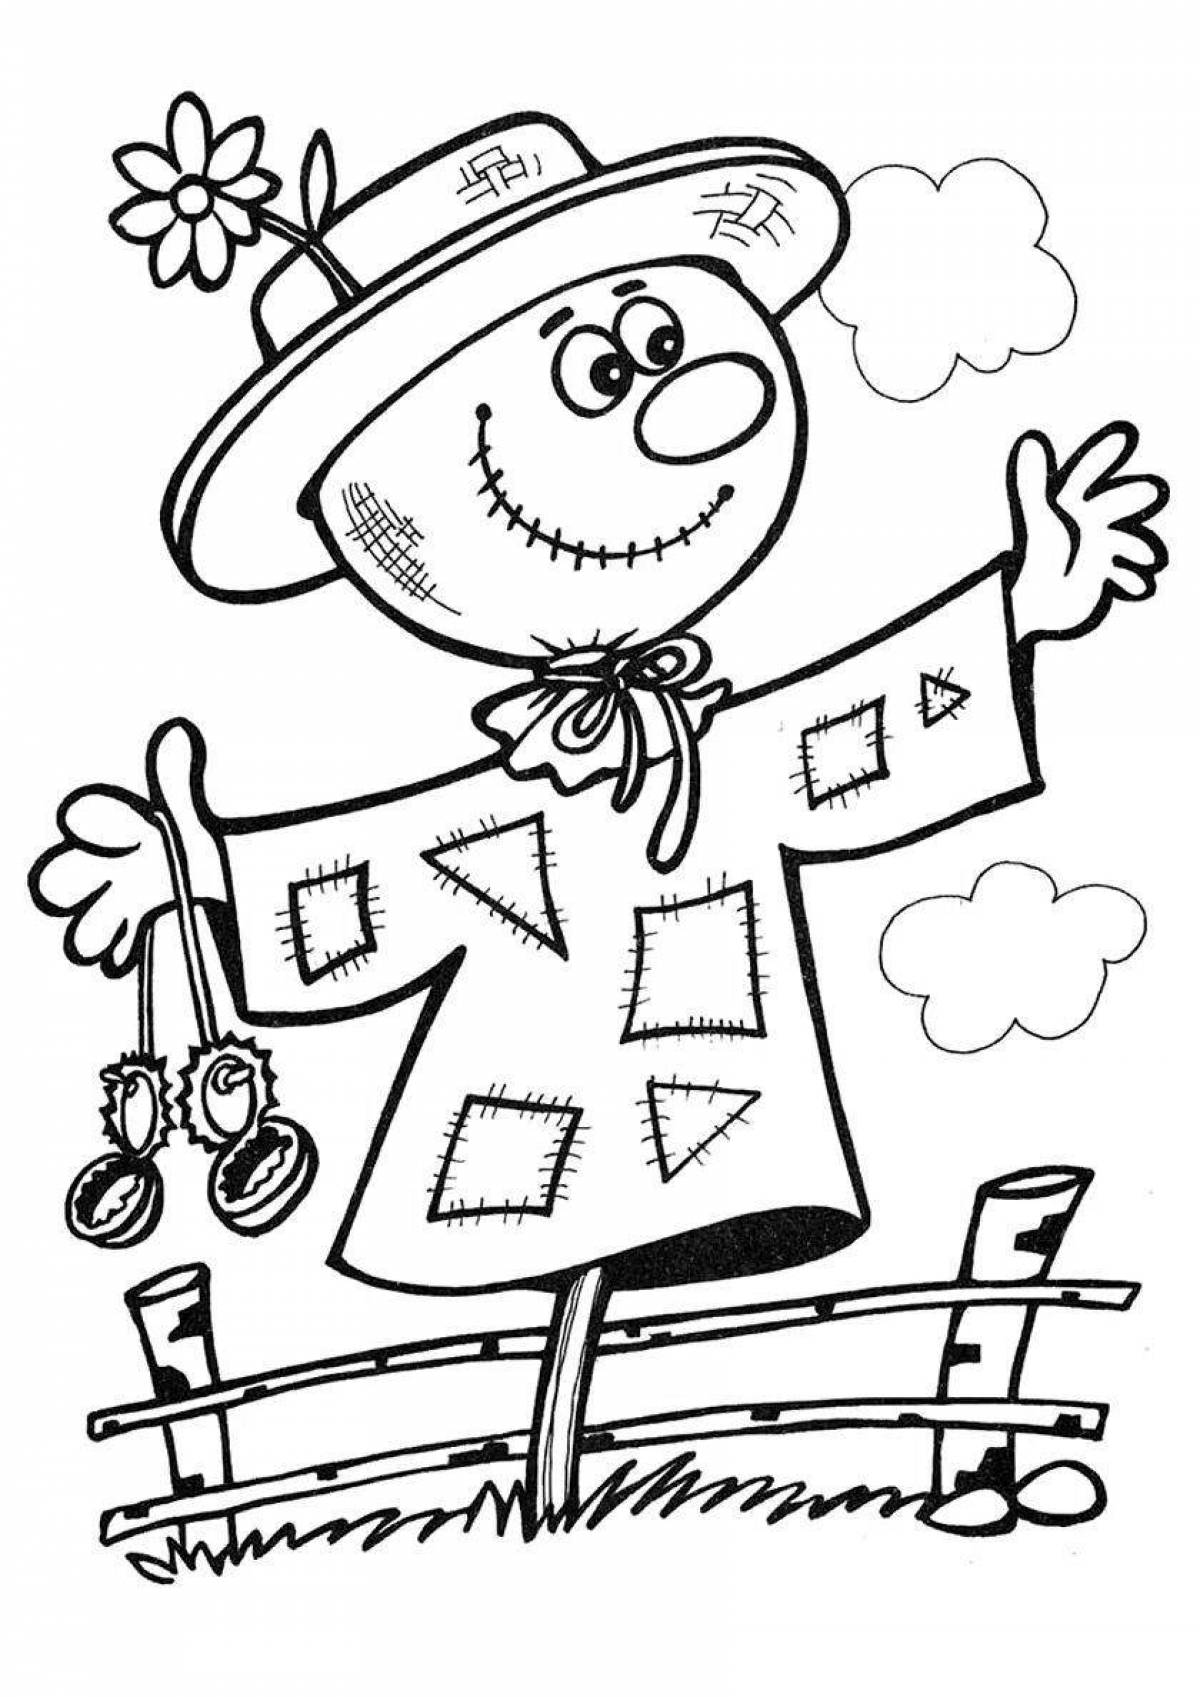 Coloring page captivating carnival scarecrow